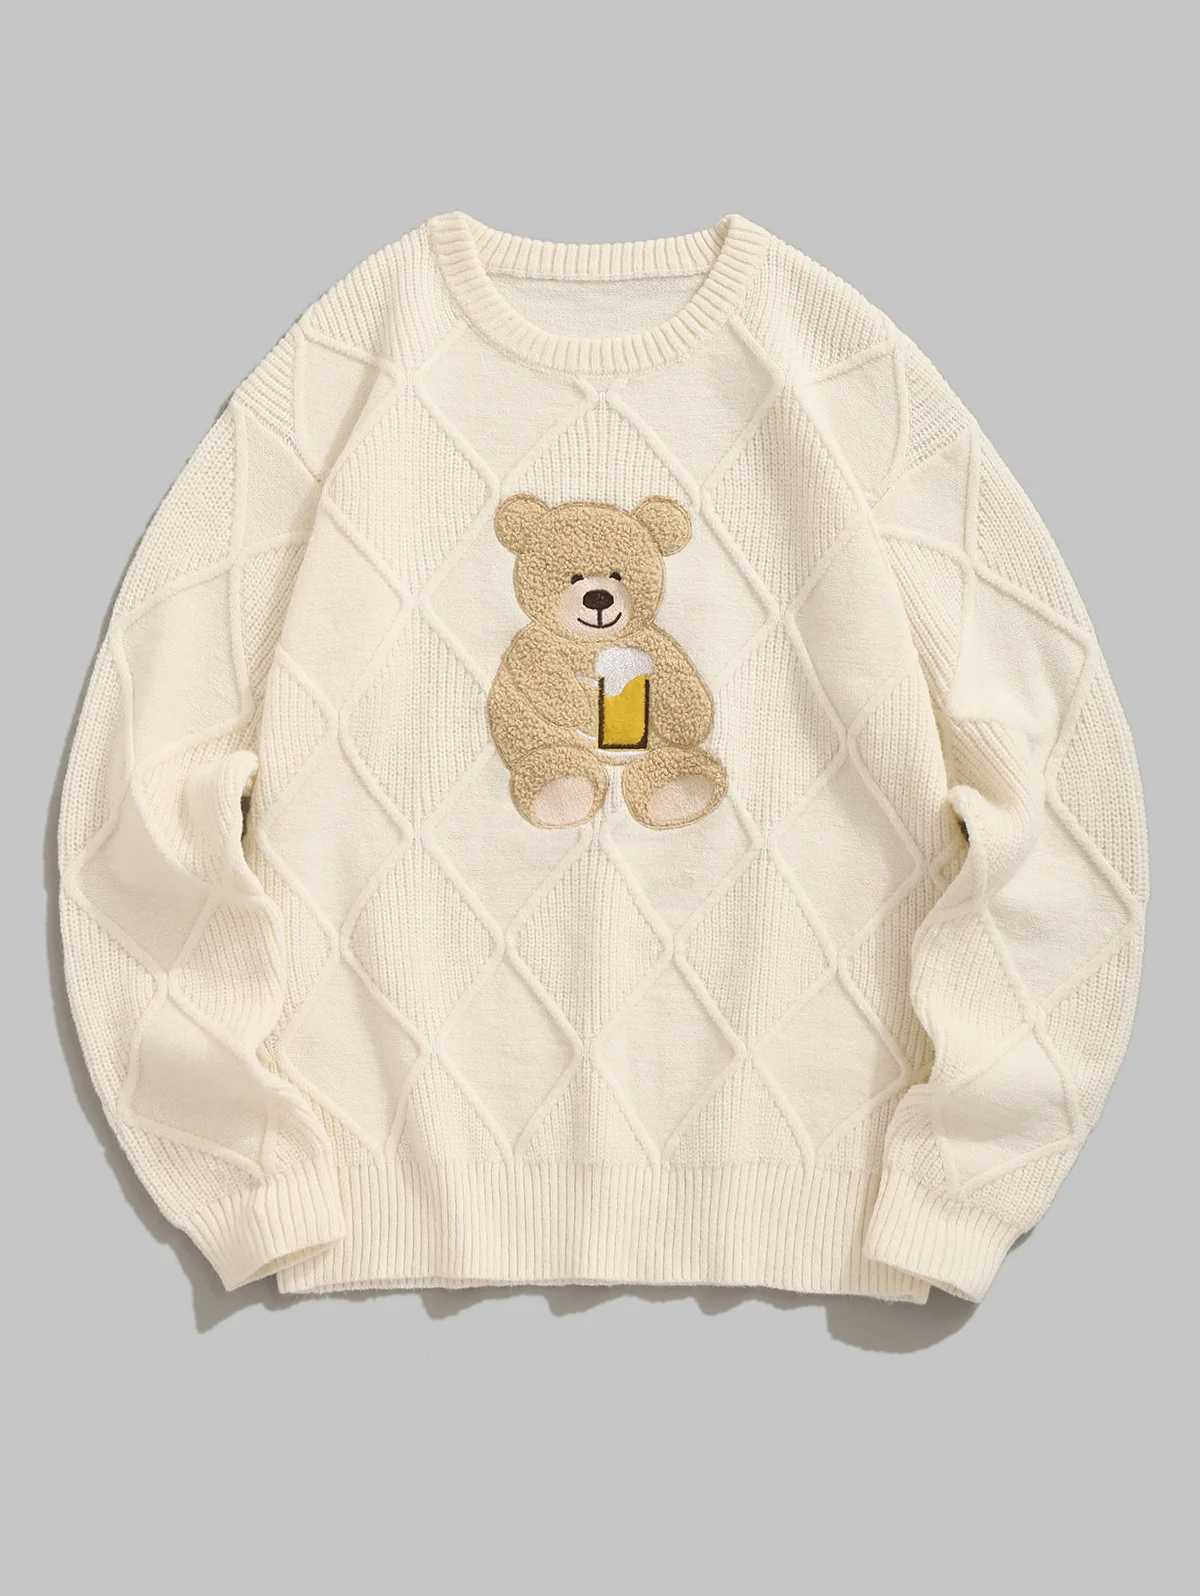 

ZAFUL Men's Terry Cloth Bear Embroidered Patch Design Round Neck Pullover Knitted Sweater